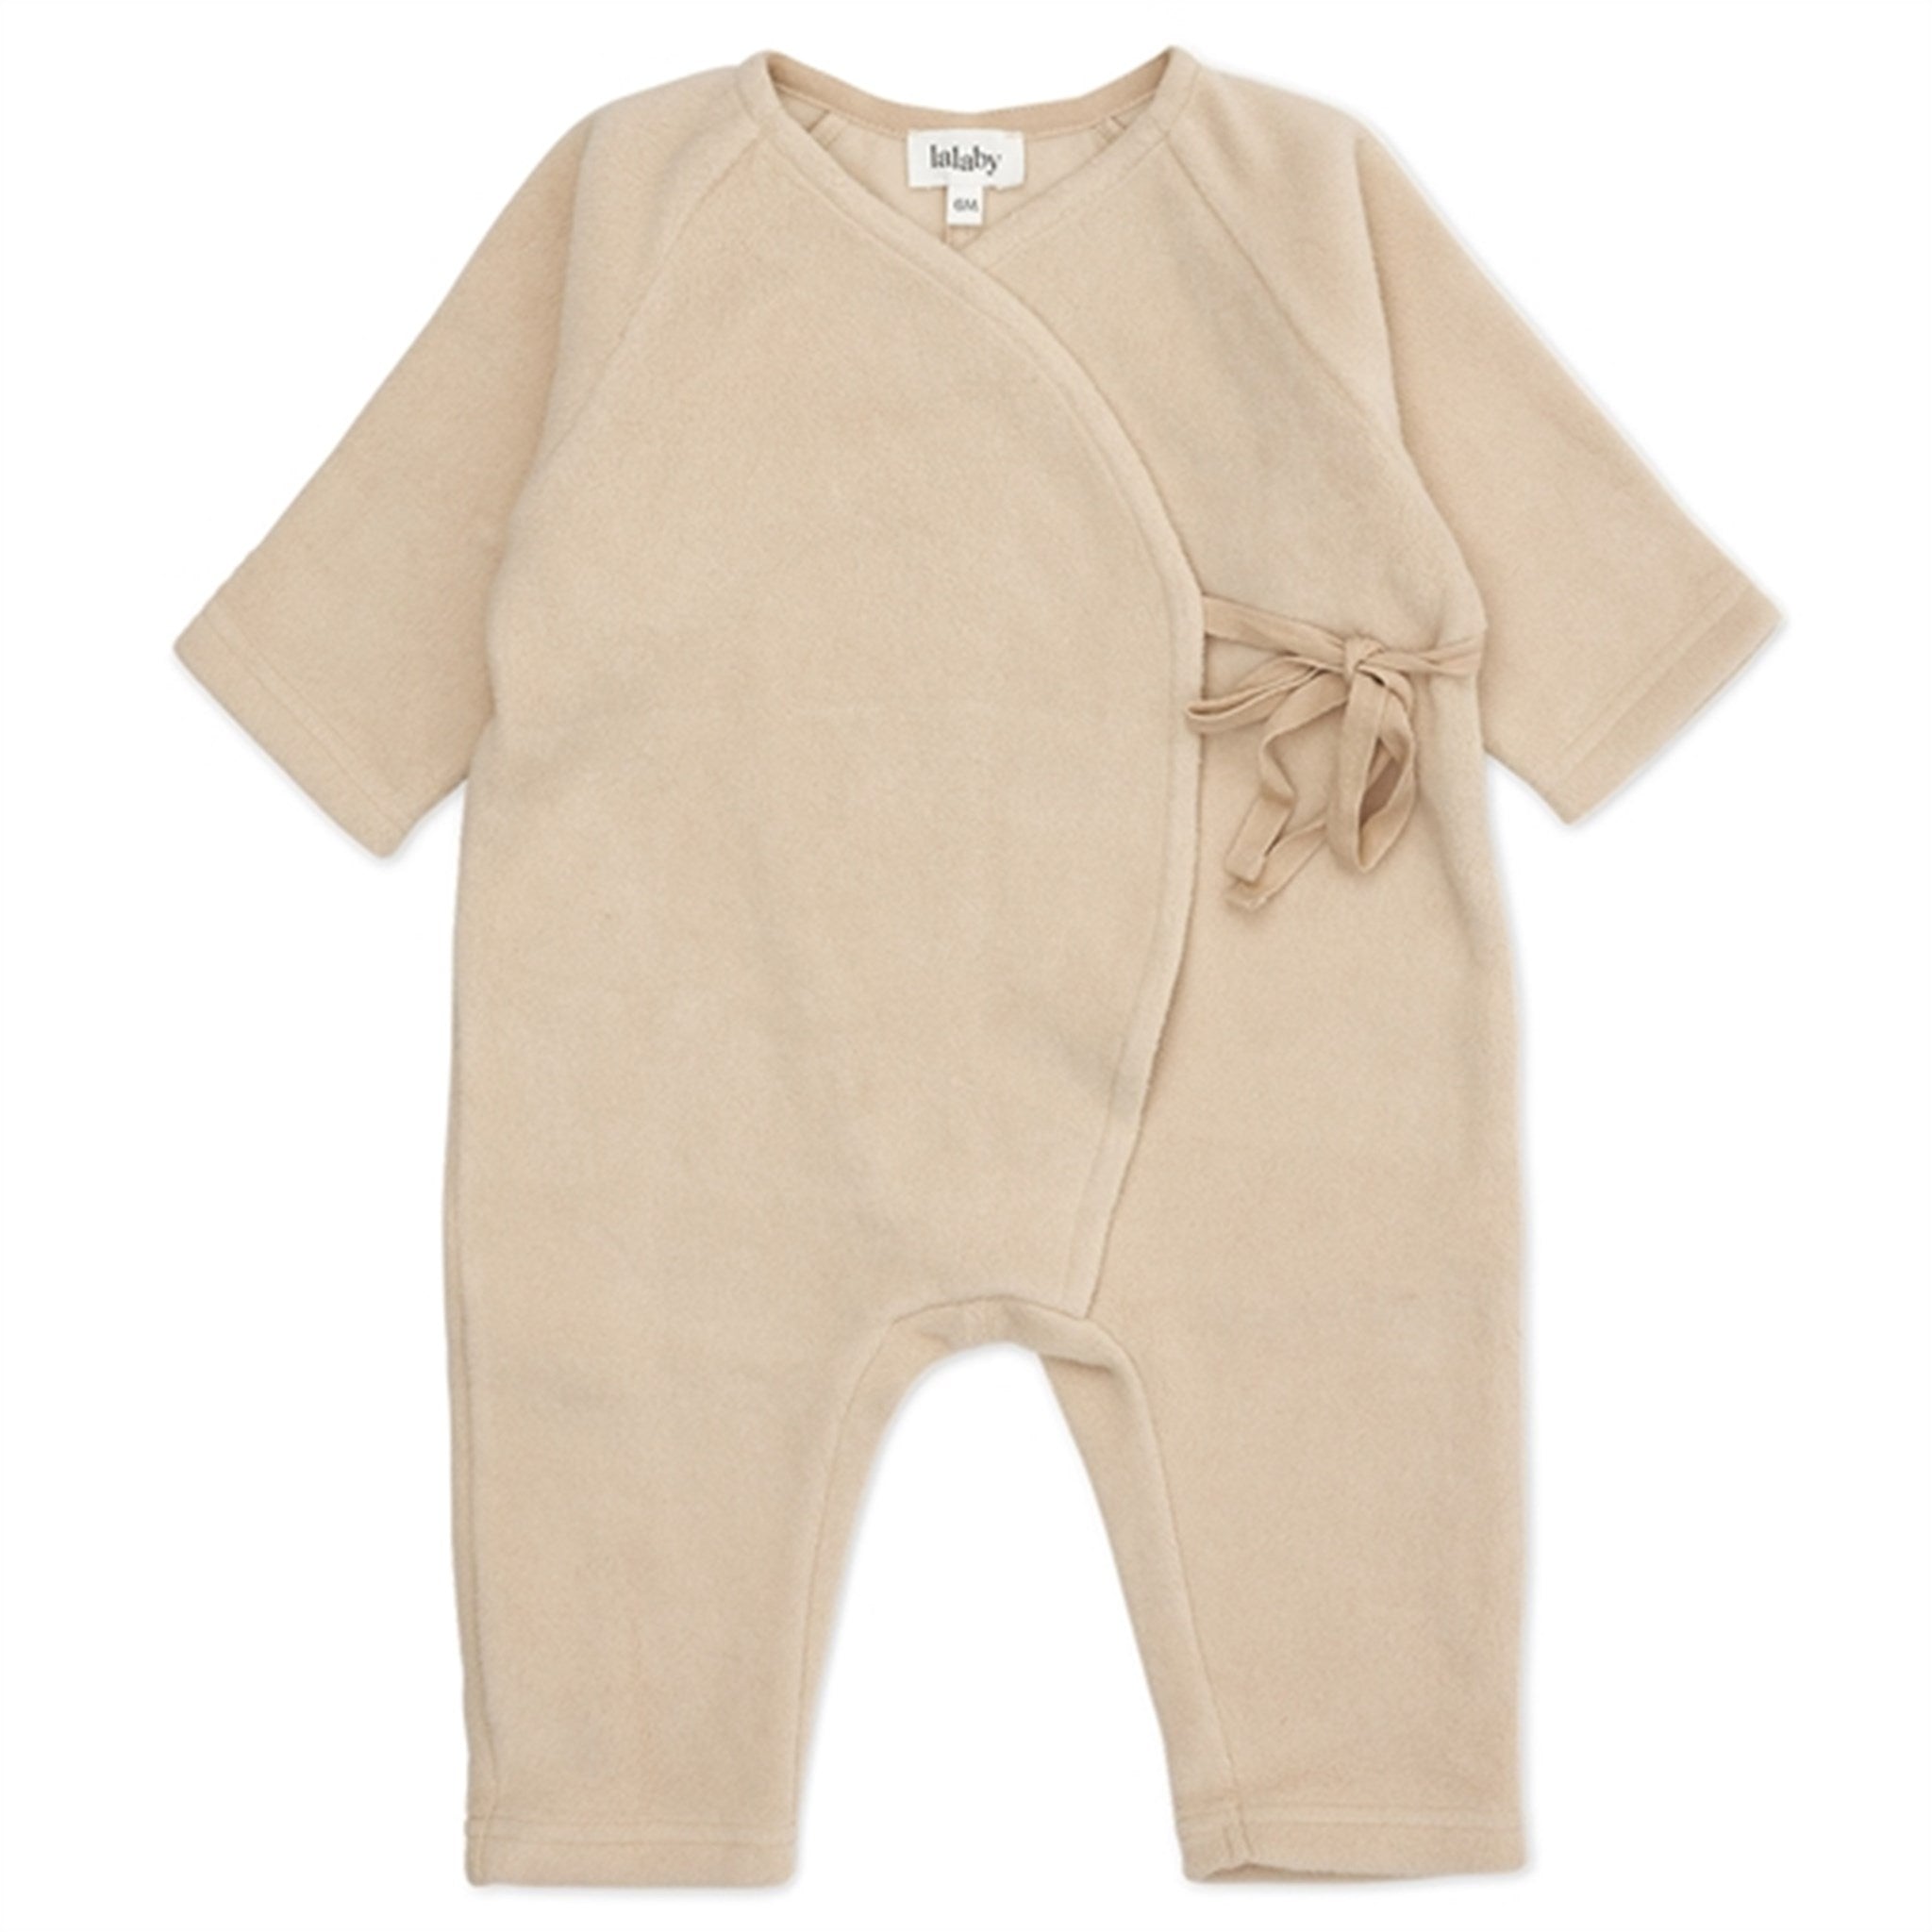 lalaby Ivory Memphis Fleece Suit